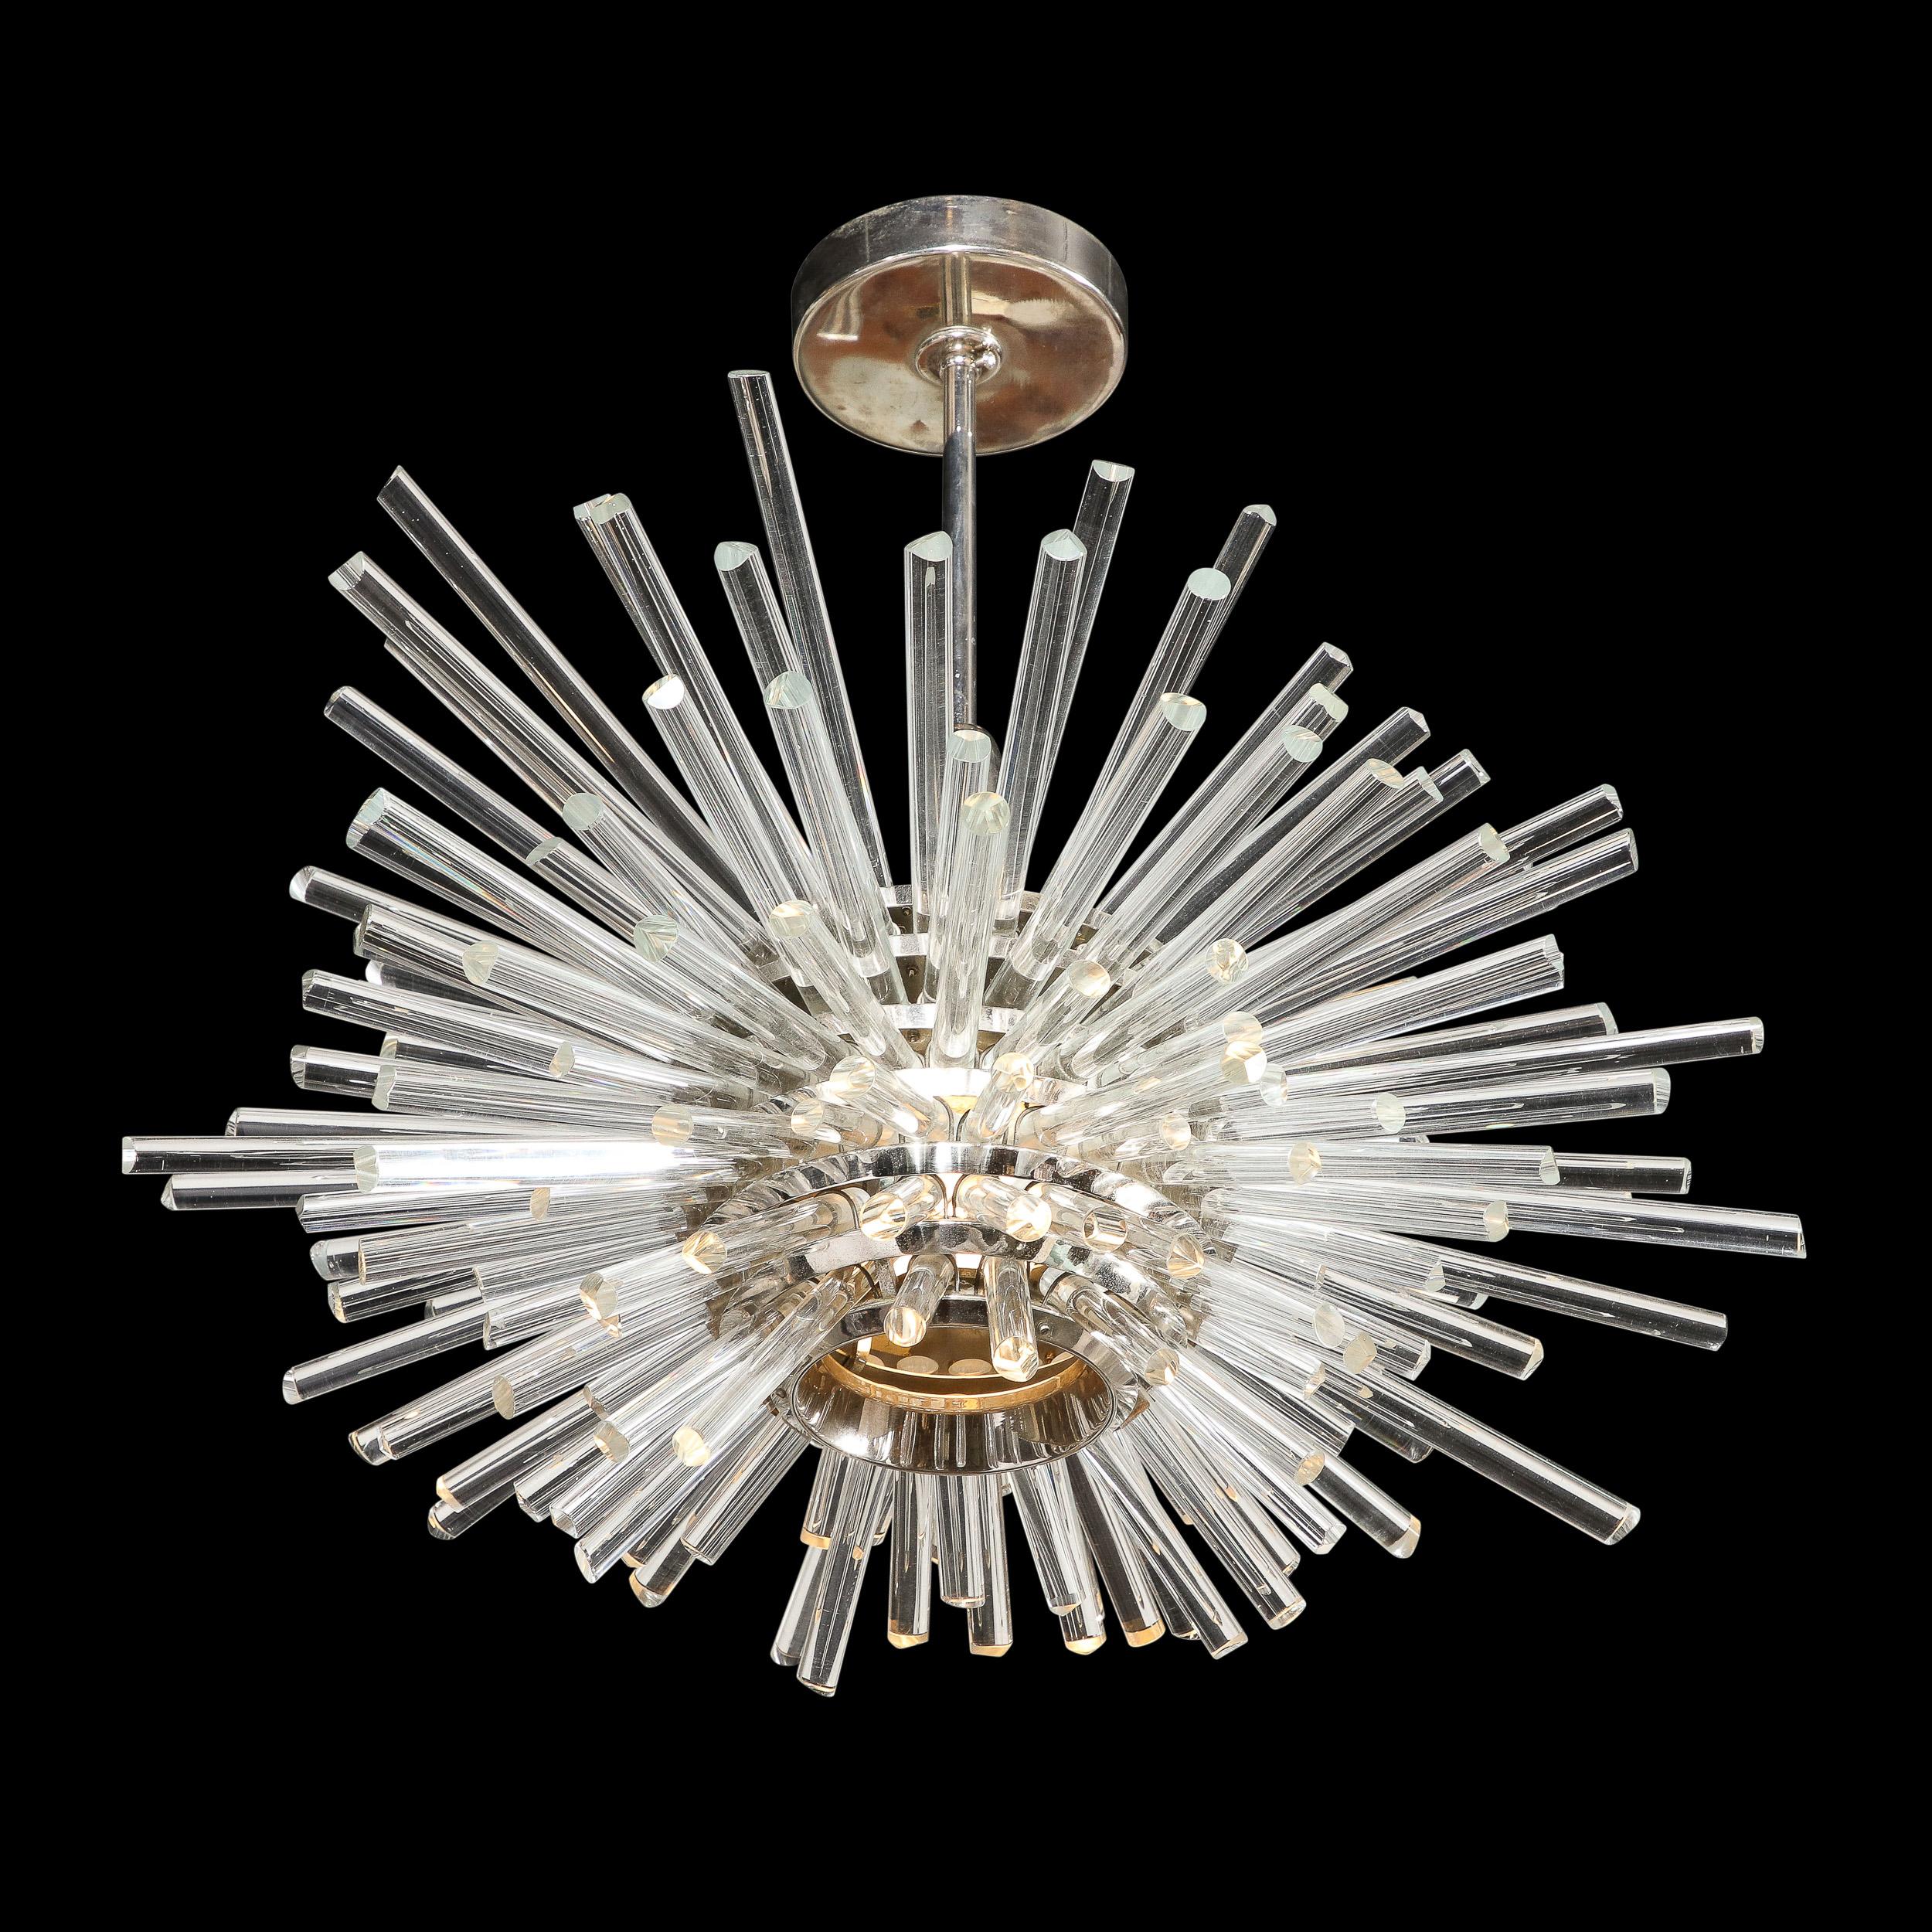 This stunning and dramatic Mid-Century Modern chandelier was realized by the legendary atelier of Bakalowits and Söhne in Austria circa 1960. It offers a spherical body in polished chrome with an abundance of translucent glass cylindrical rods